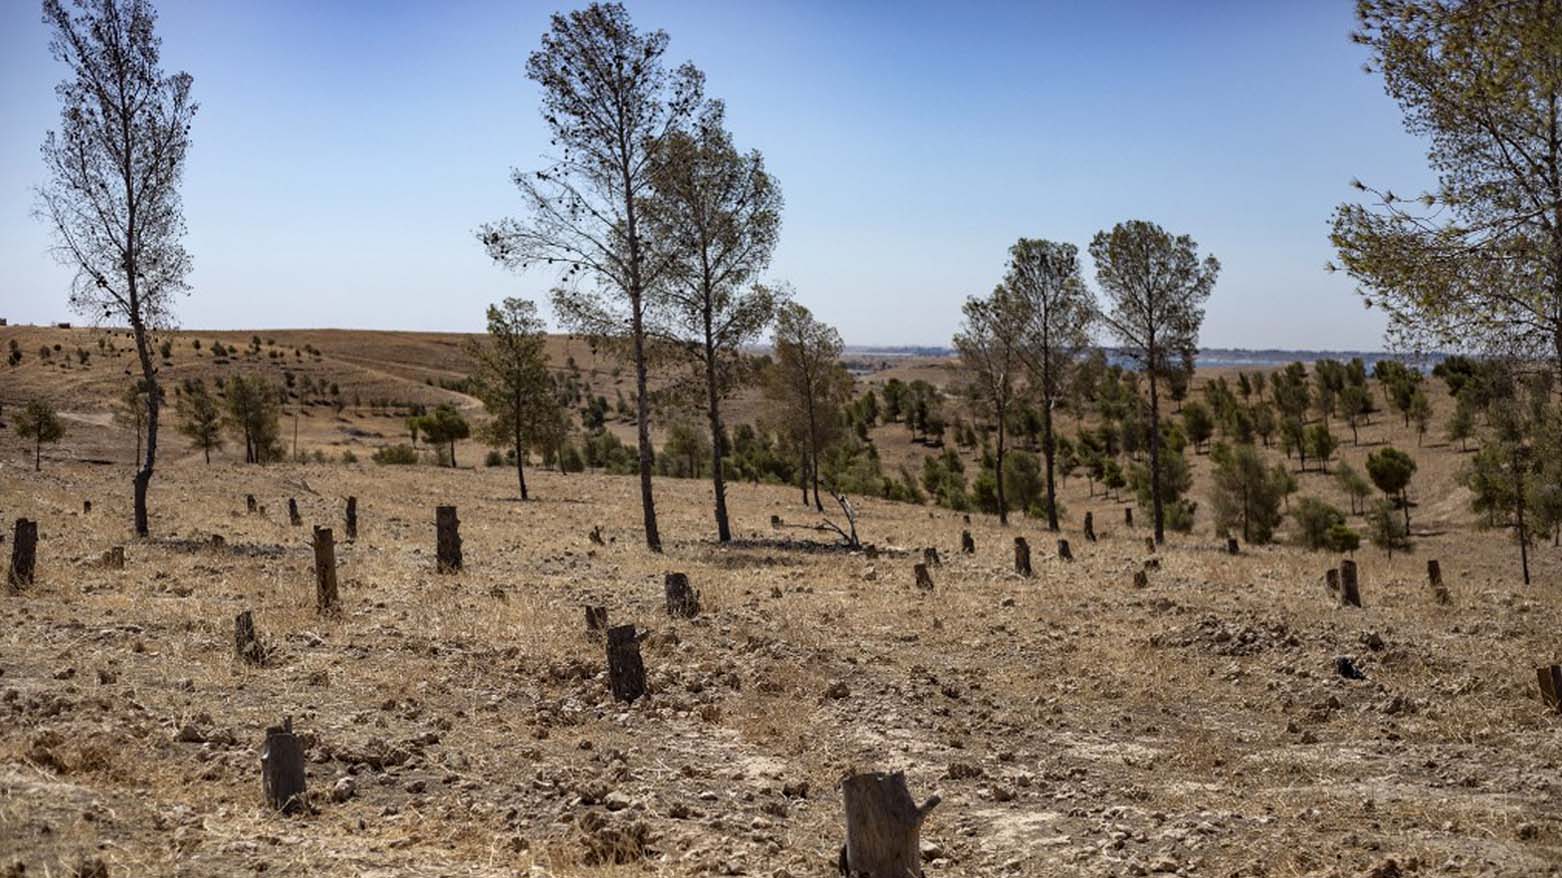 Cut trees stand at the Tabqa Reserve near the village of Jaabar, in Syria's northeastern Raqa governorate, July 11, 2023. (Photo: Delil Souleiman/AFP)